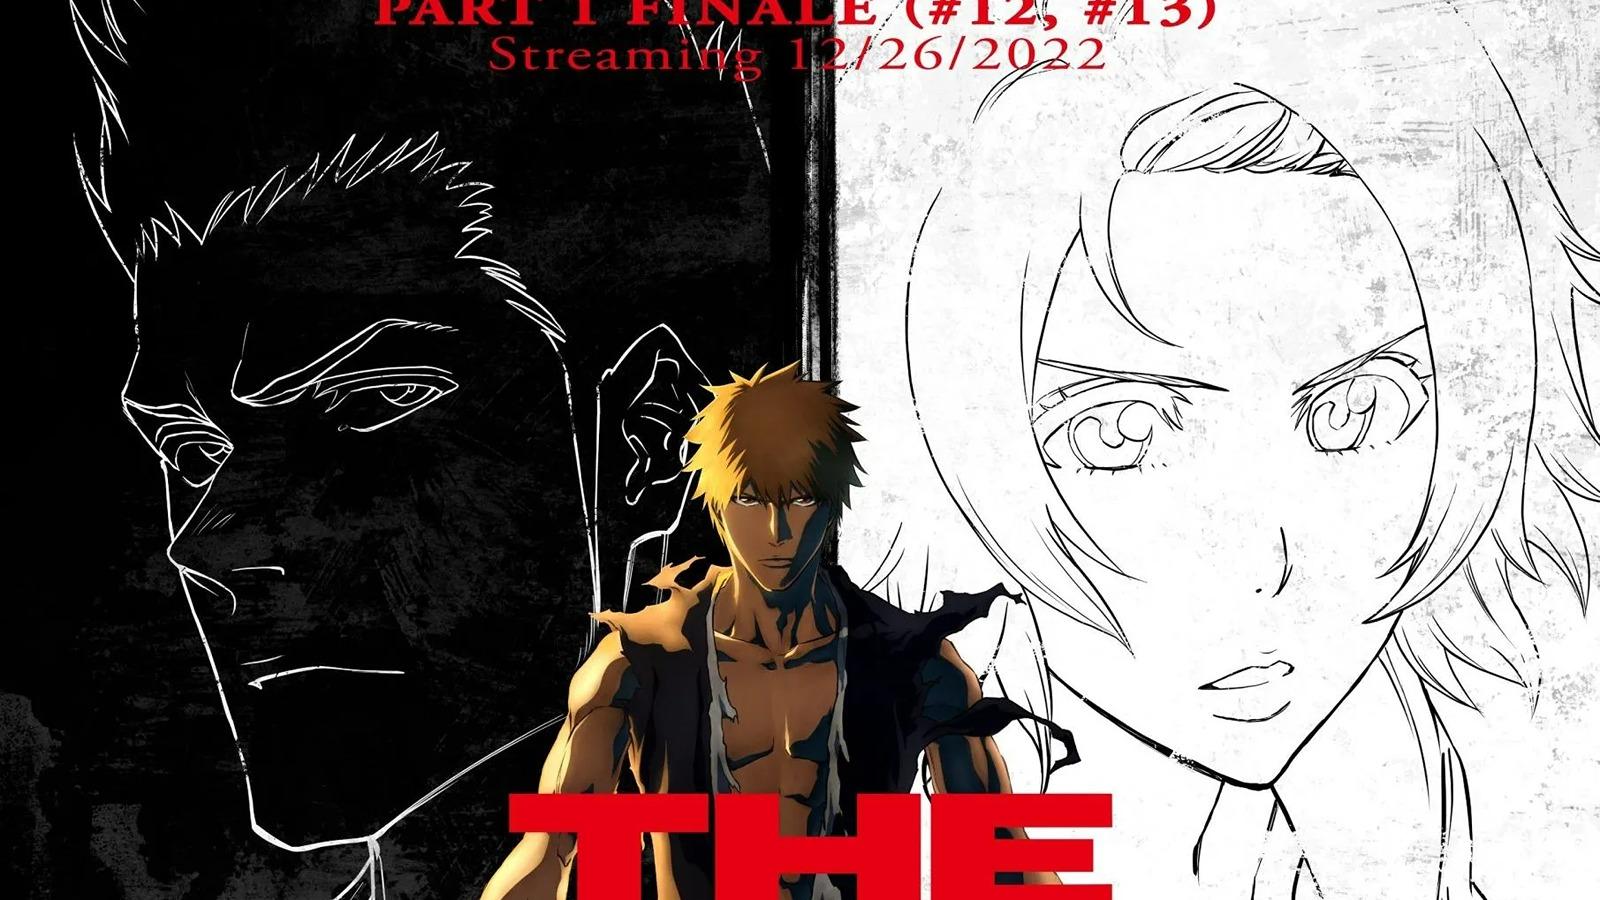 The official poster of Bleach TYBW part 2